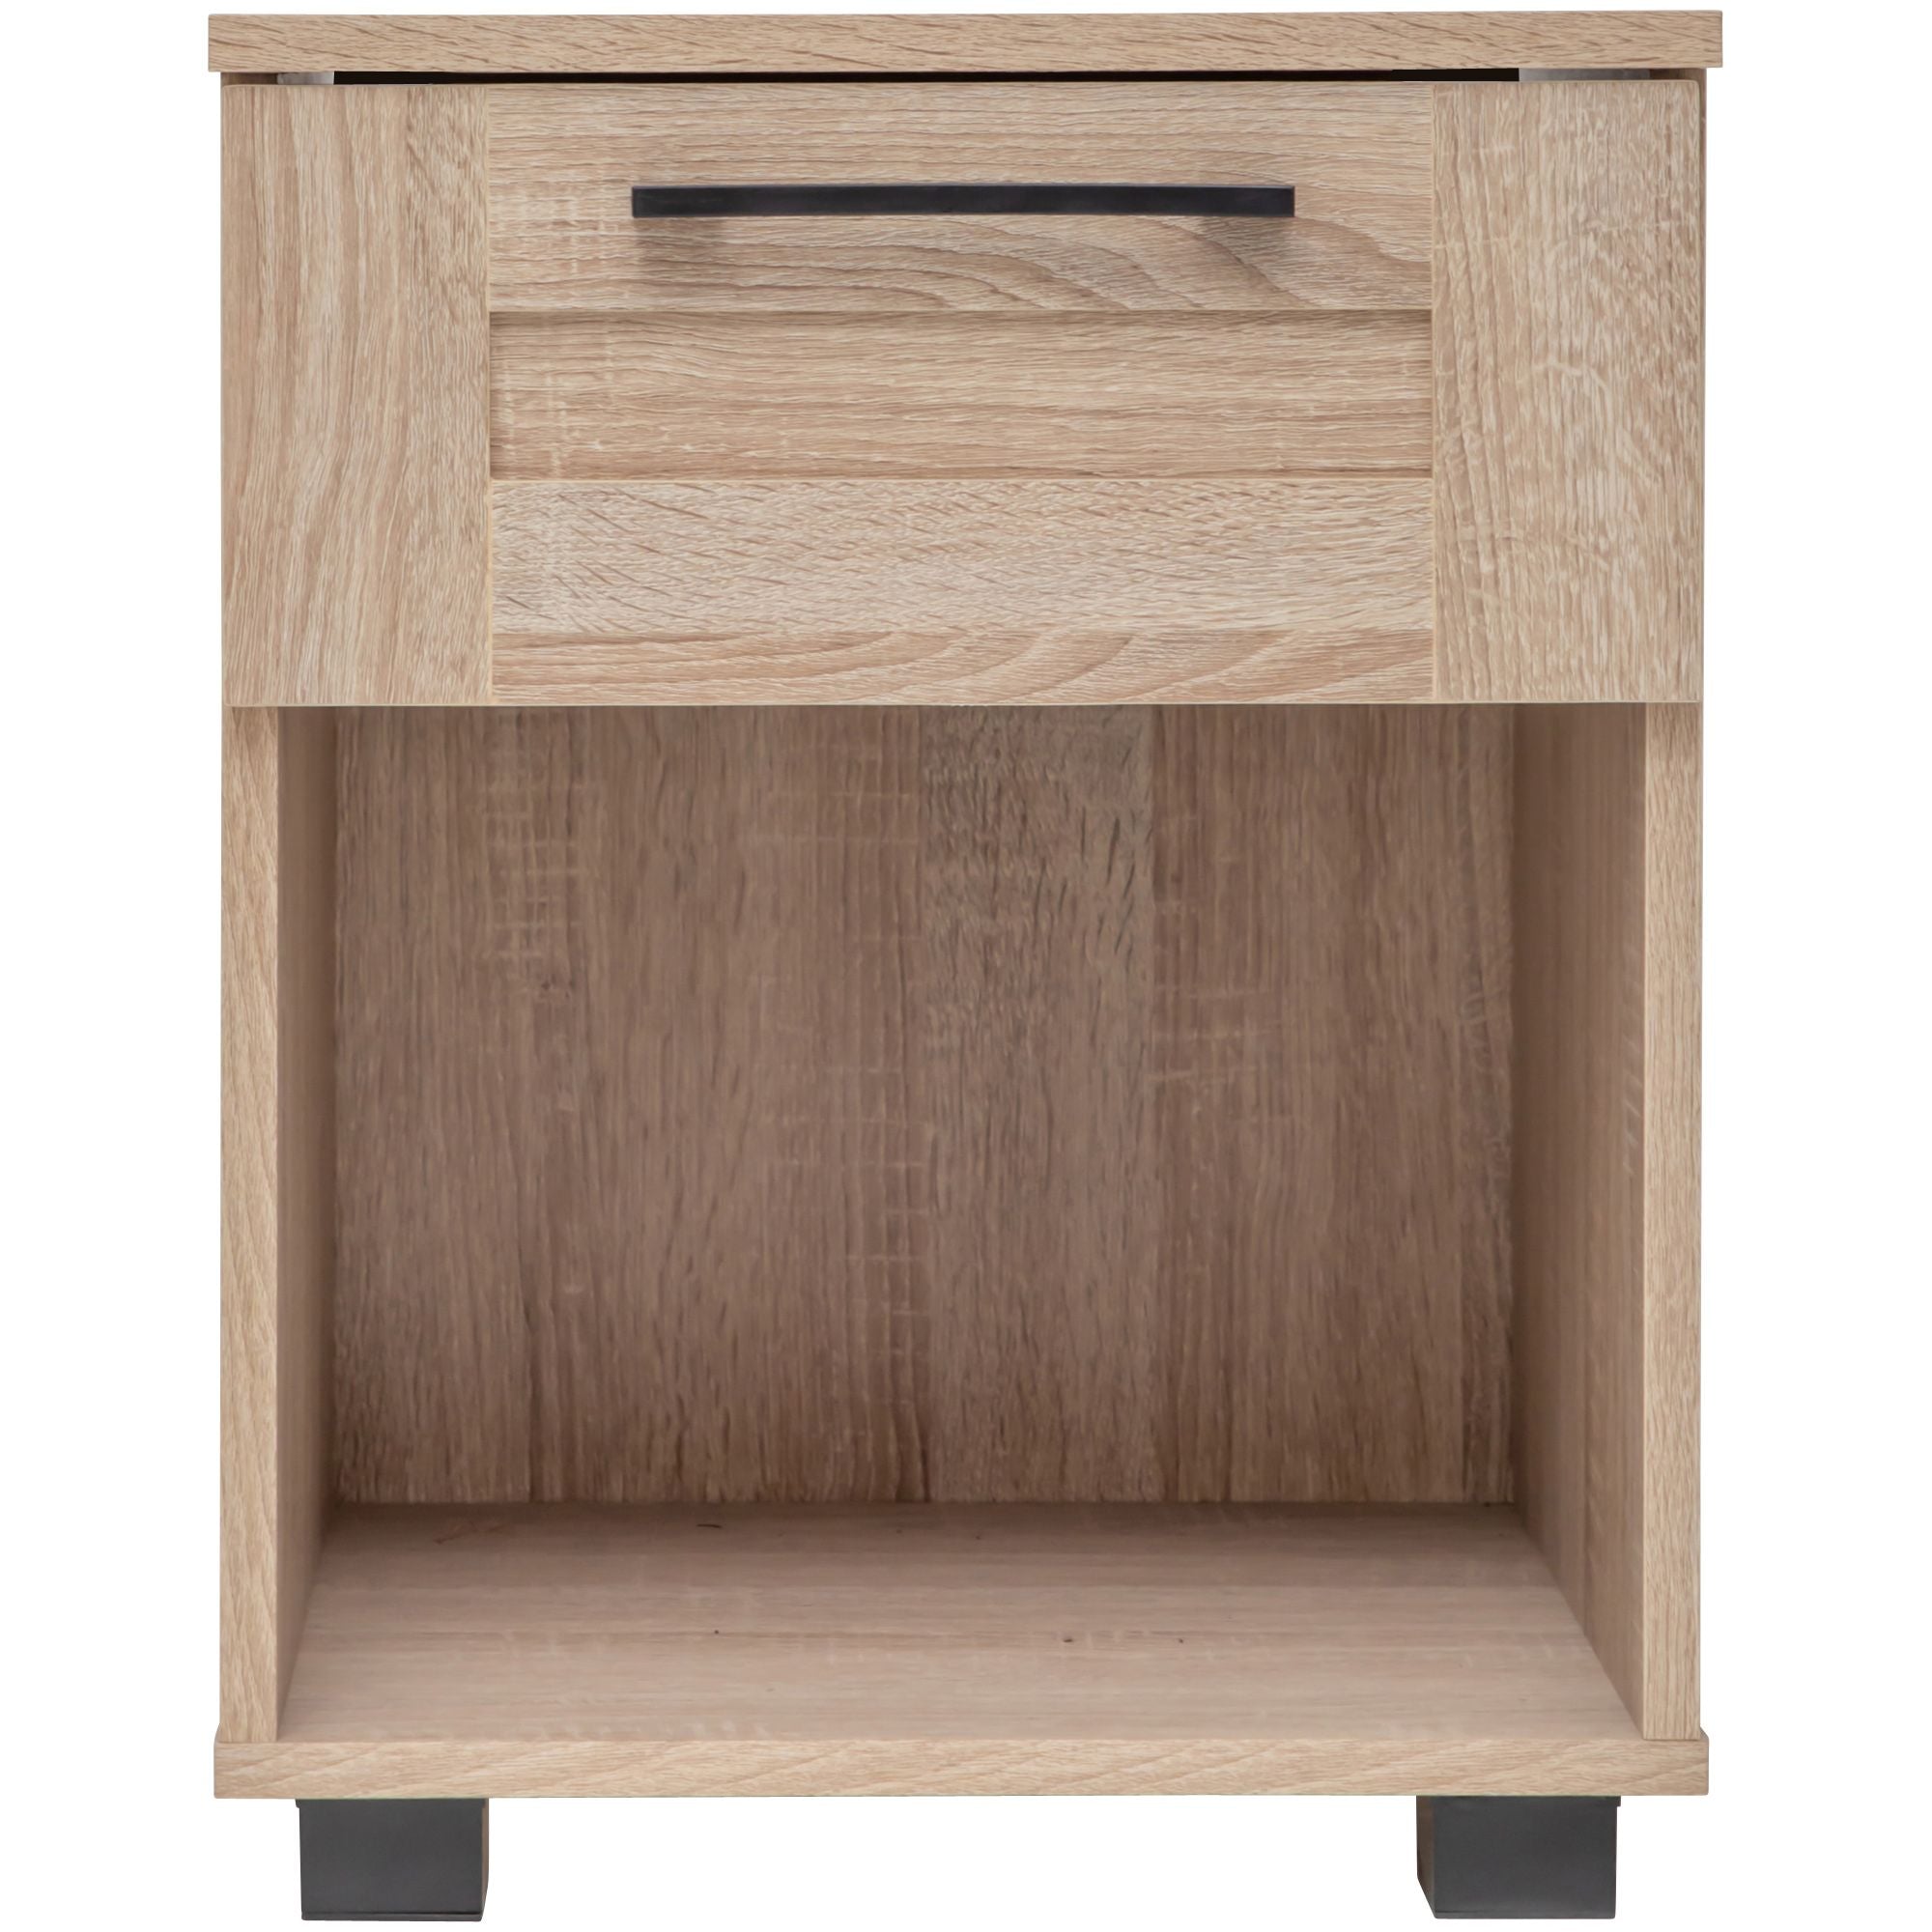 Montreal Bedside Table with 1 Drawer - Light Sonoma Oak